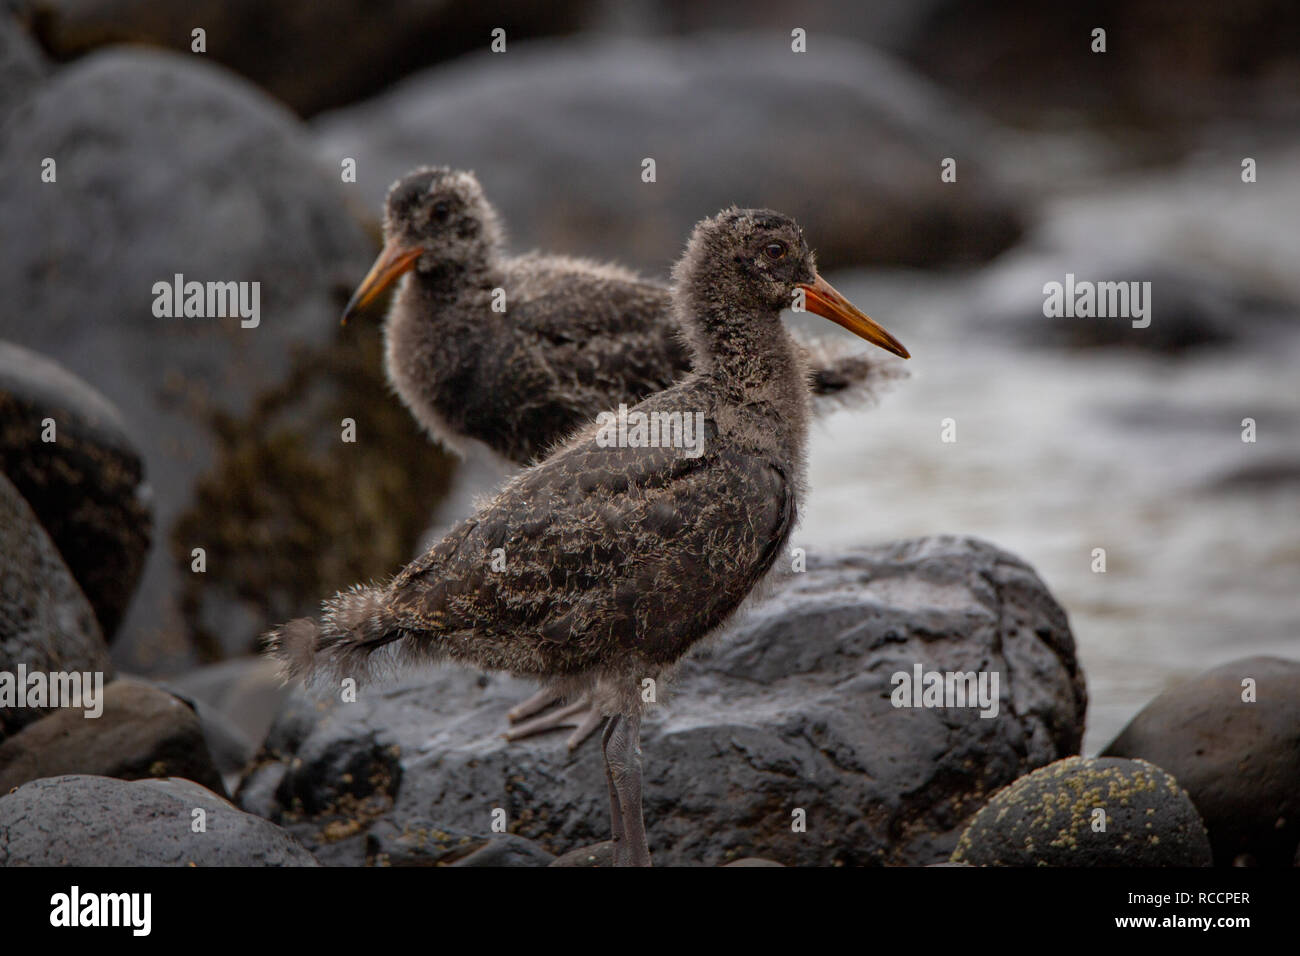 Two juvenile oyster catchers in their natural habitat on the coastal shore line at Flea Bay, New Zealand Stock Photo